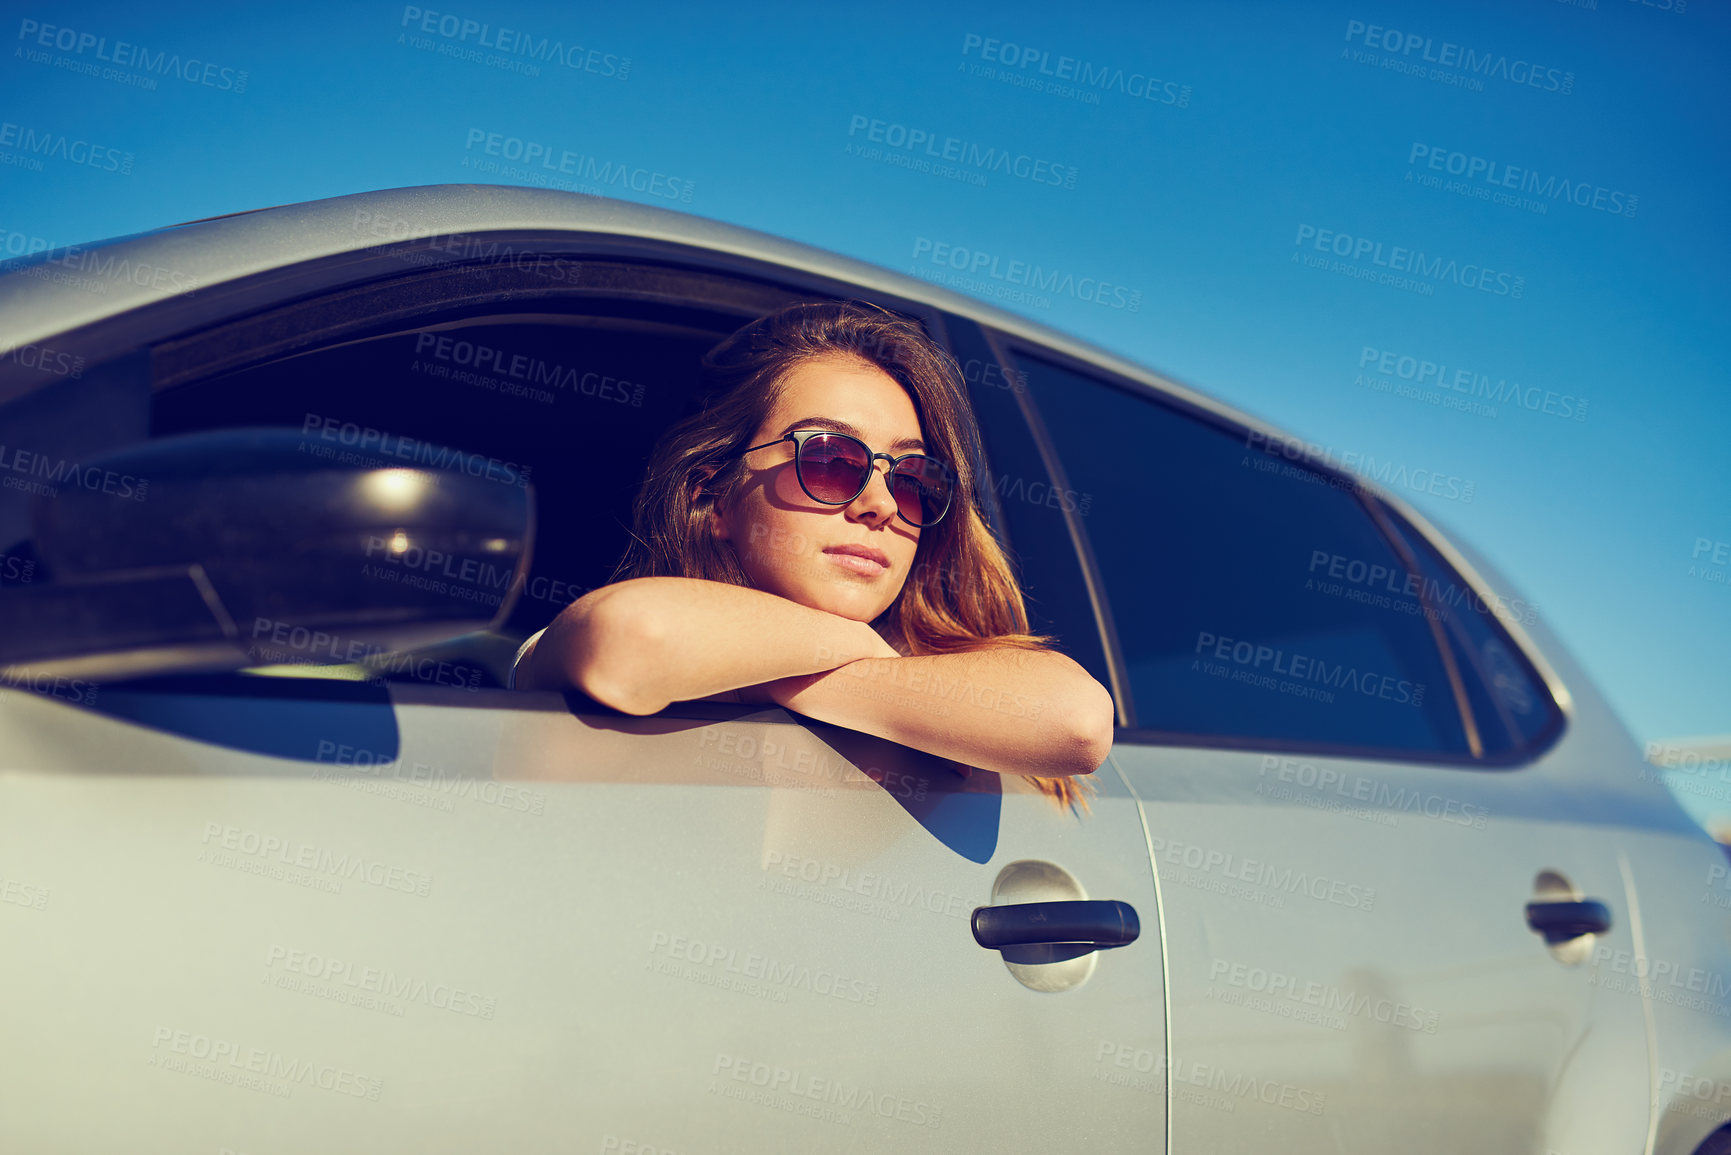 Buy stock photo Shot of a young woman looking at the view while sitting in her car